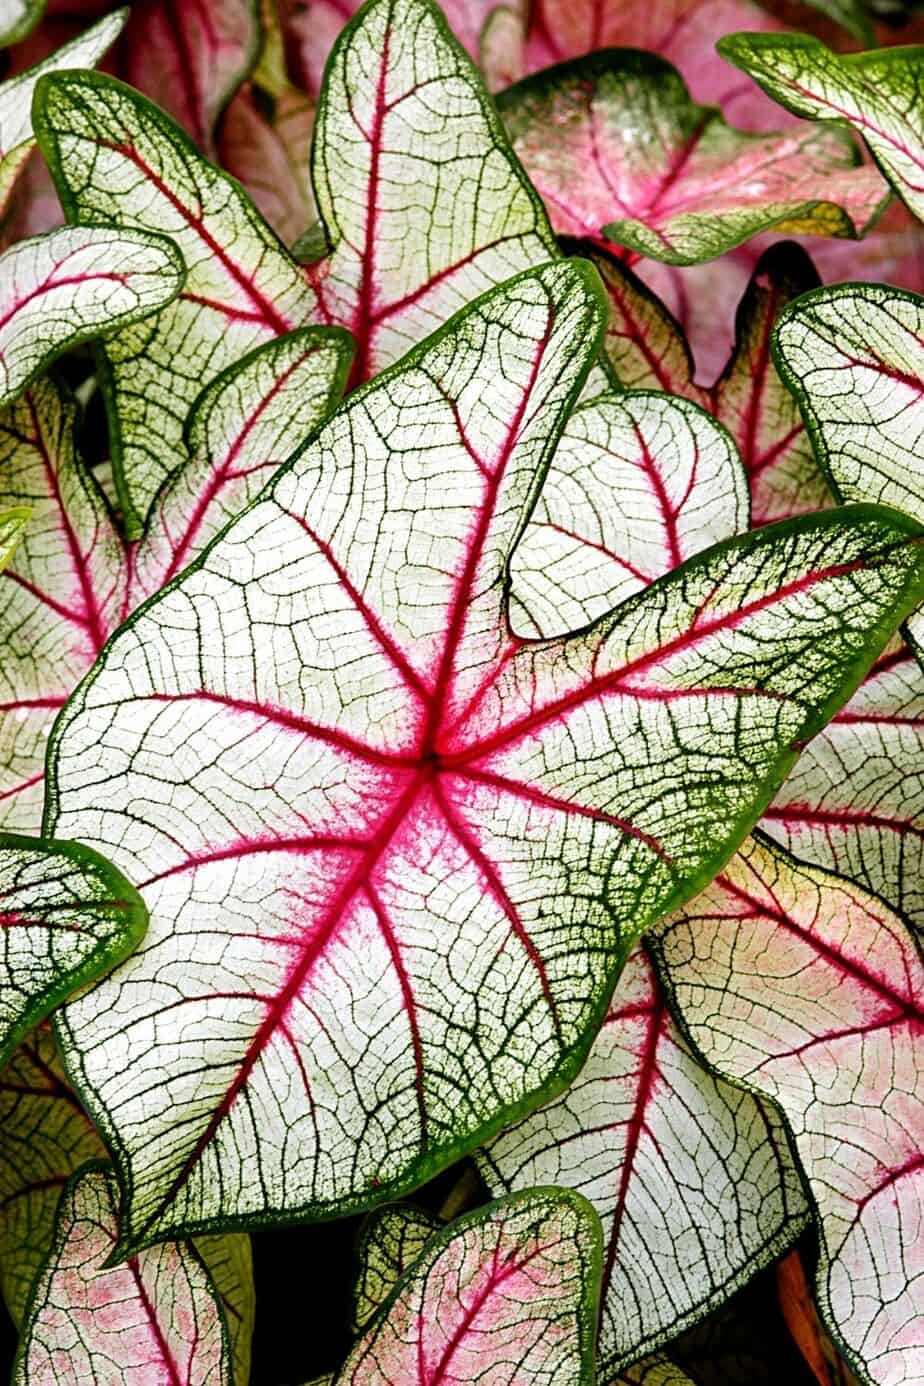 Caladium, known for its large heart-shaped leaves, can be grown on your north-facing balcony